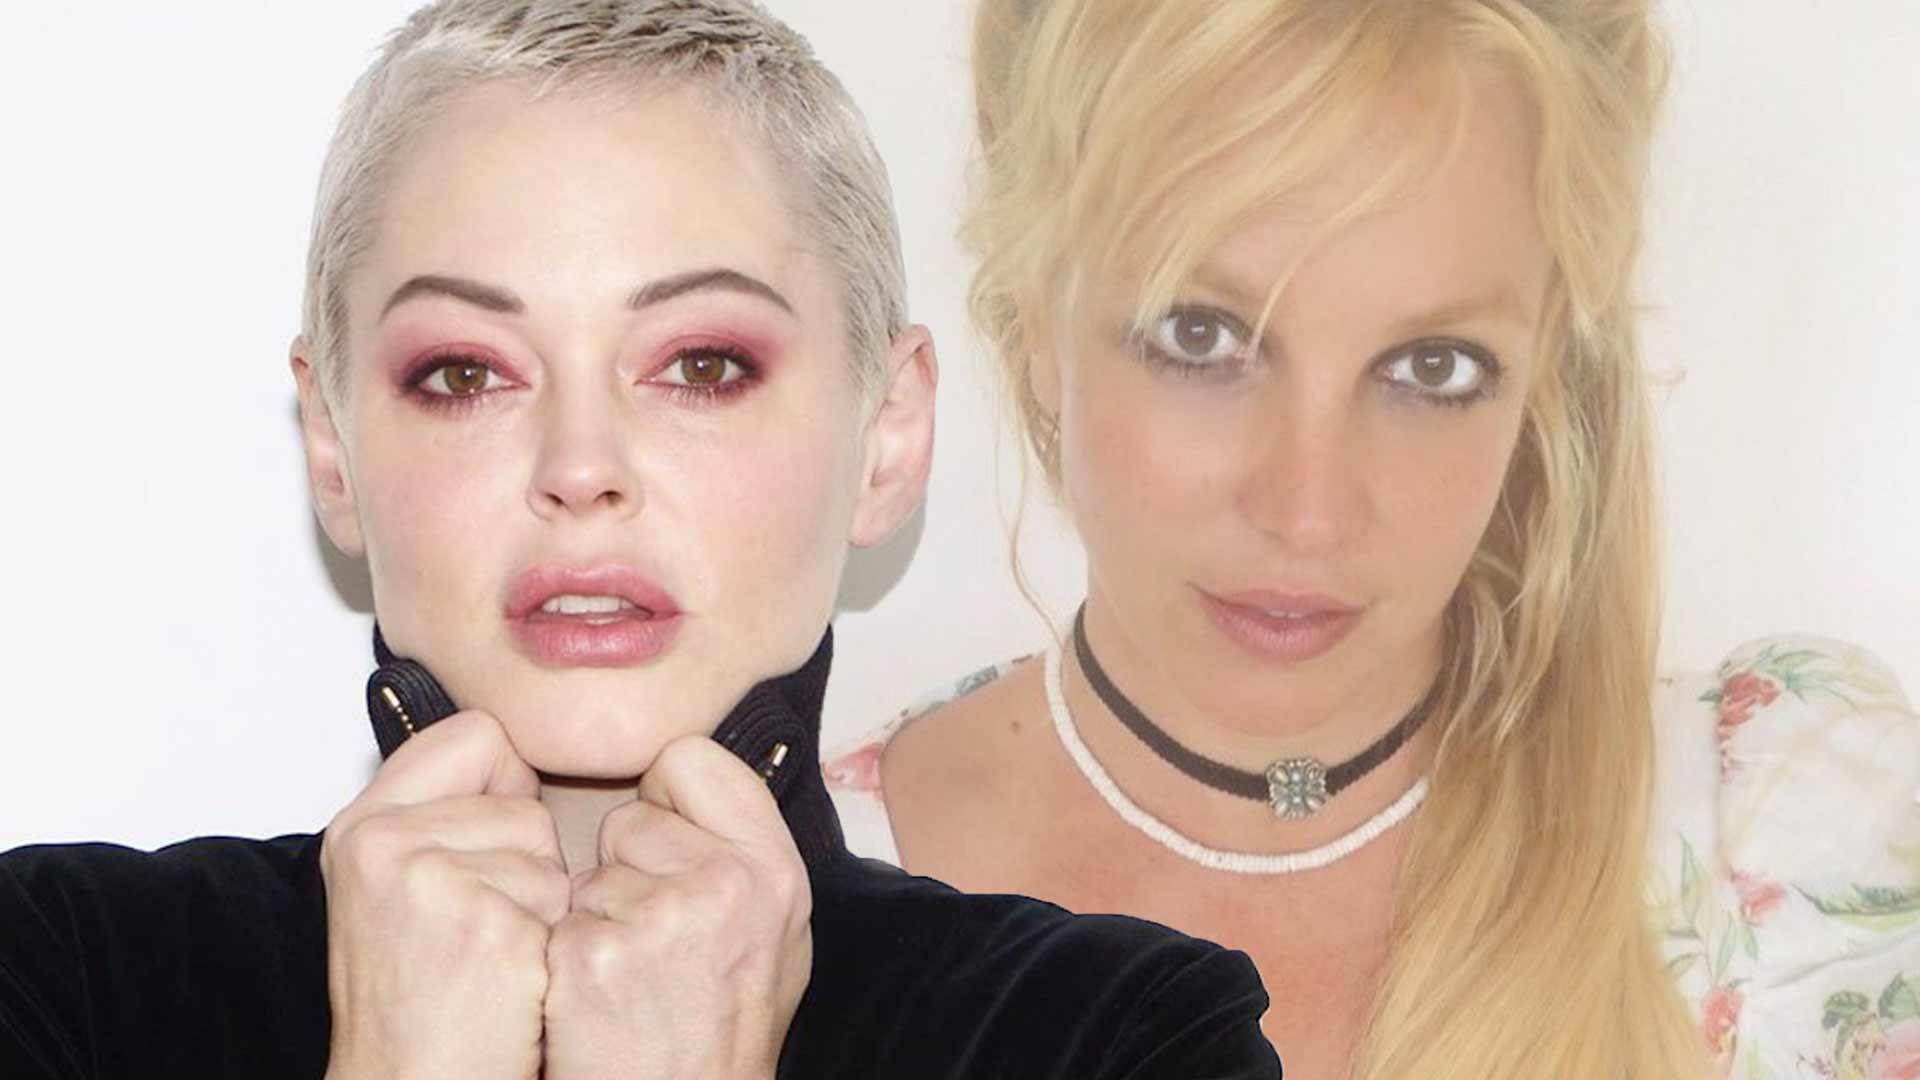 Rose McGowan Supports #FreeBritney, Says Britney Spears ‘Can Be Saved’